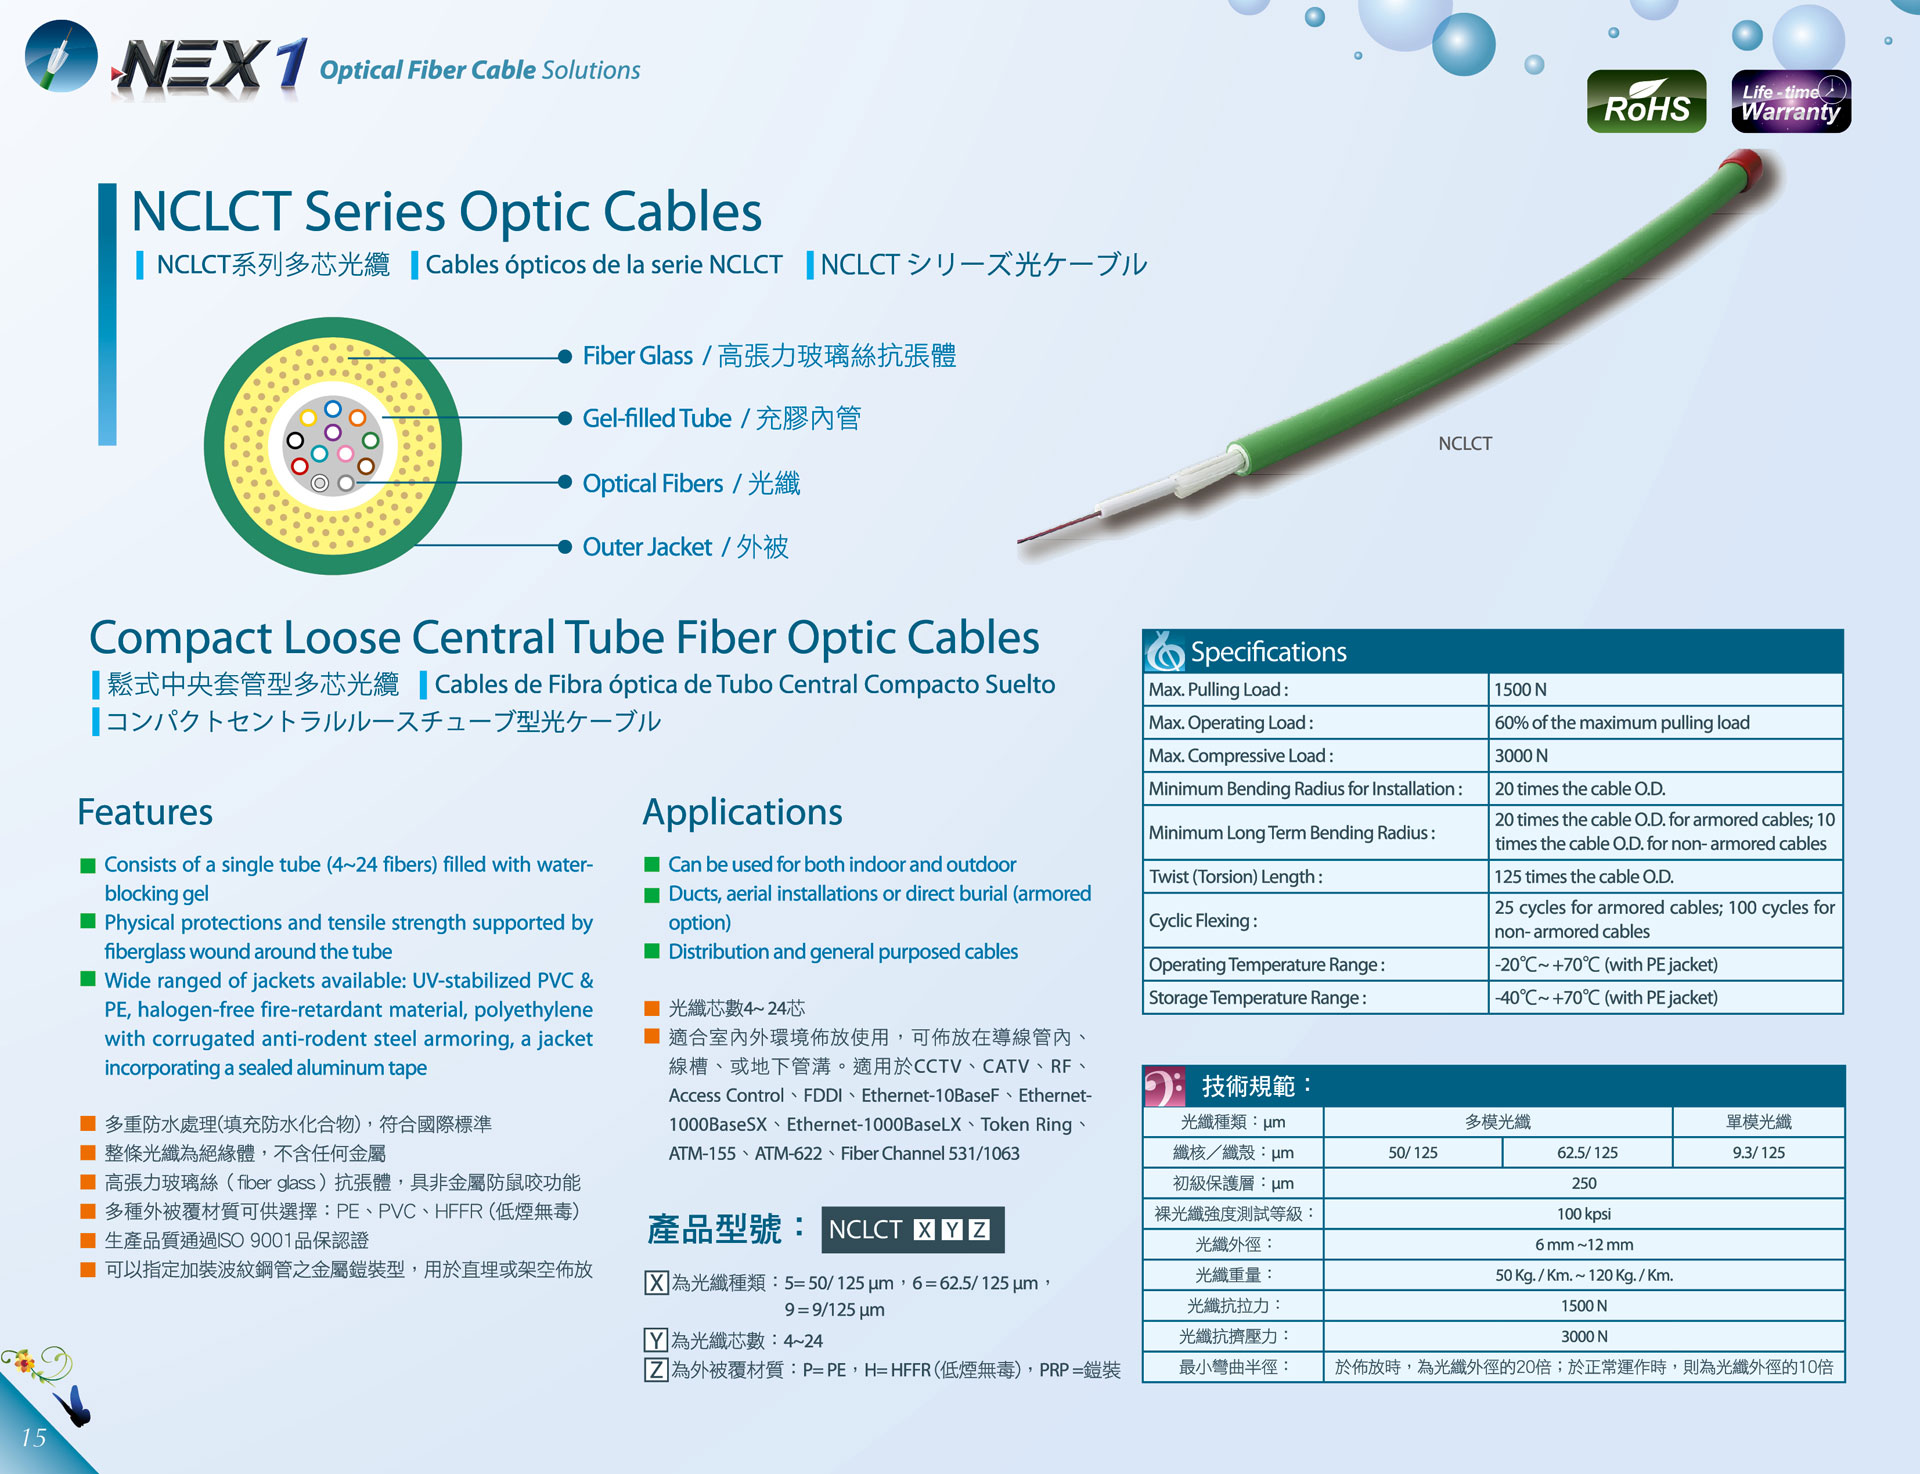 NEX1 Compact Loose Central Tube Fiber Optic Cables